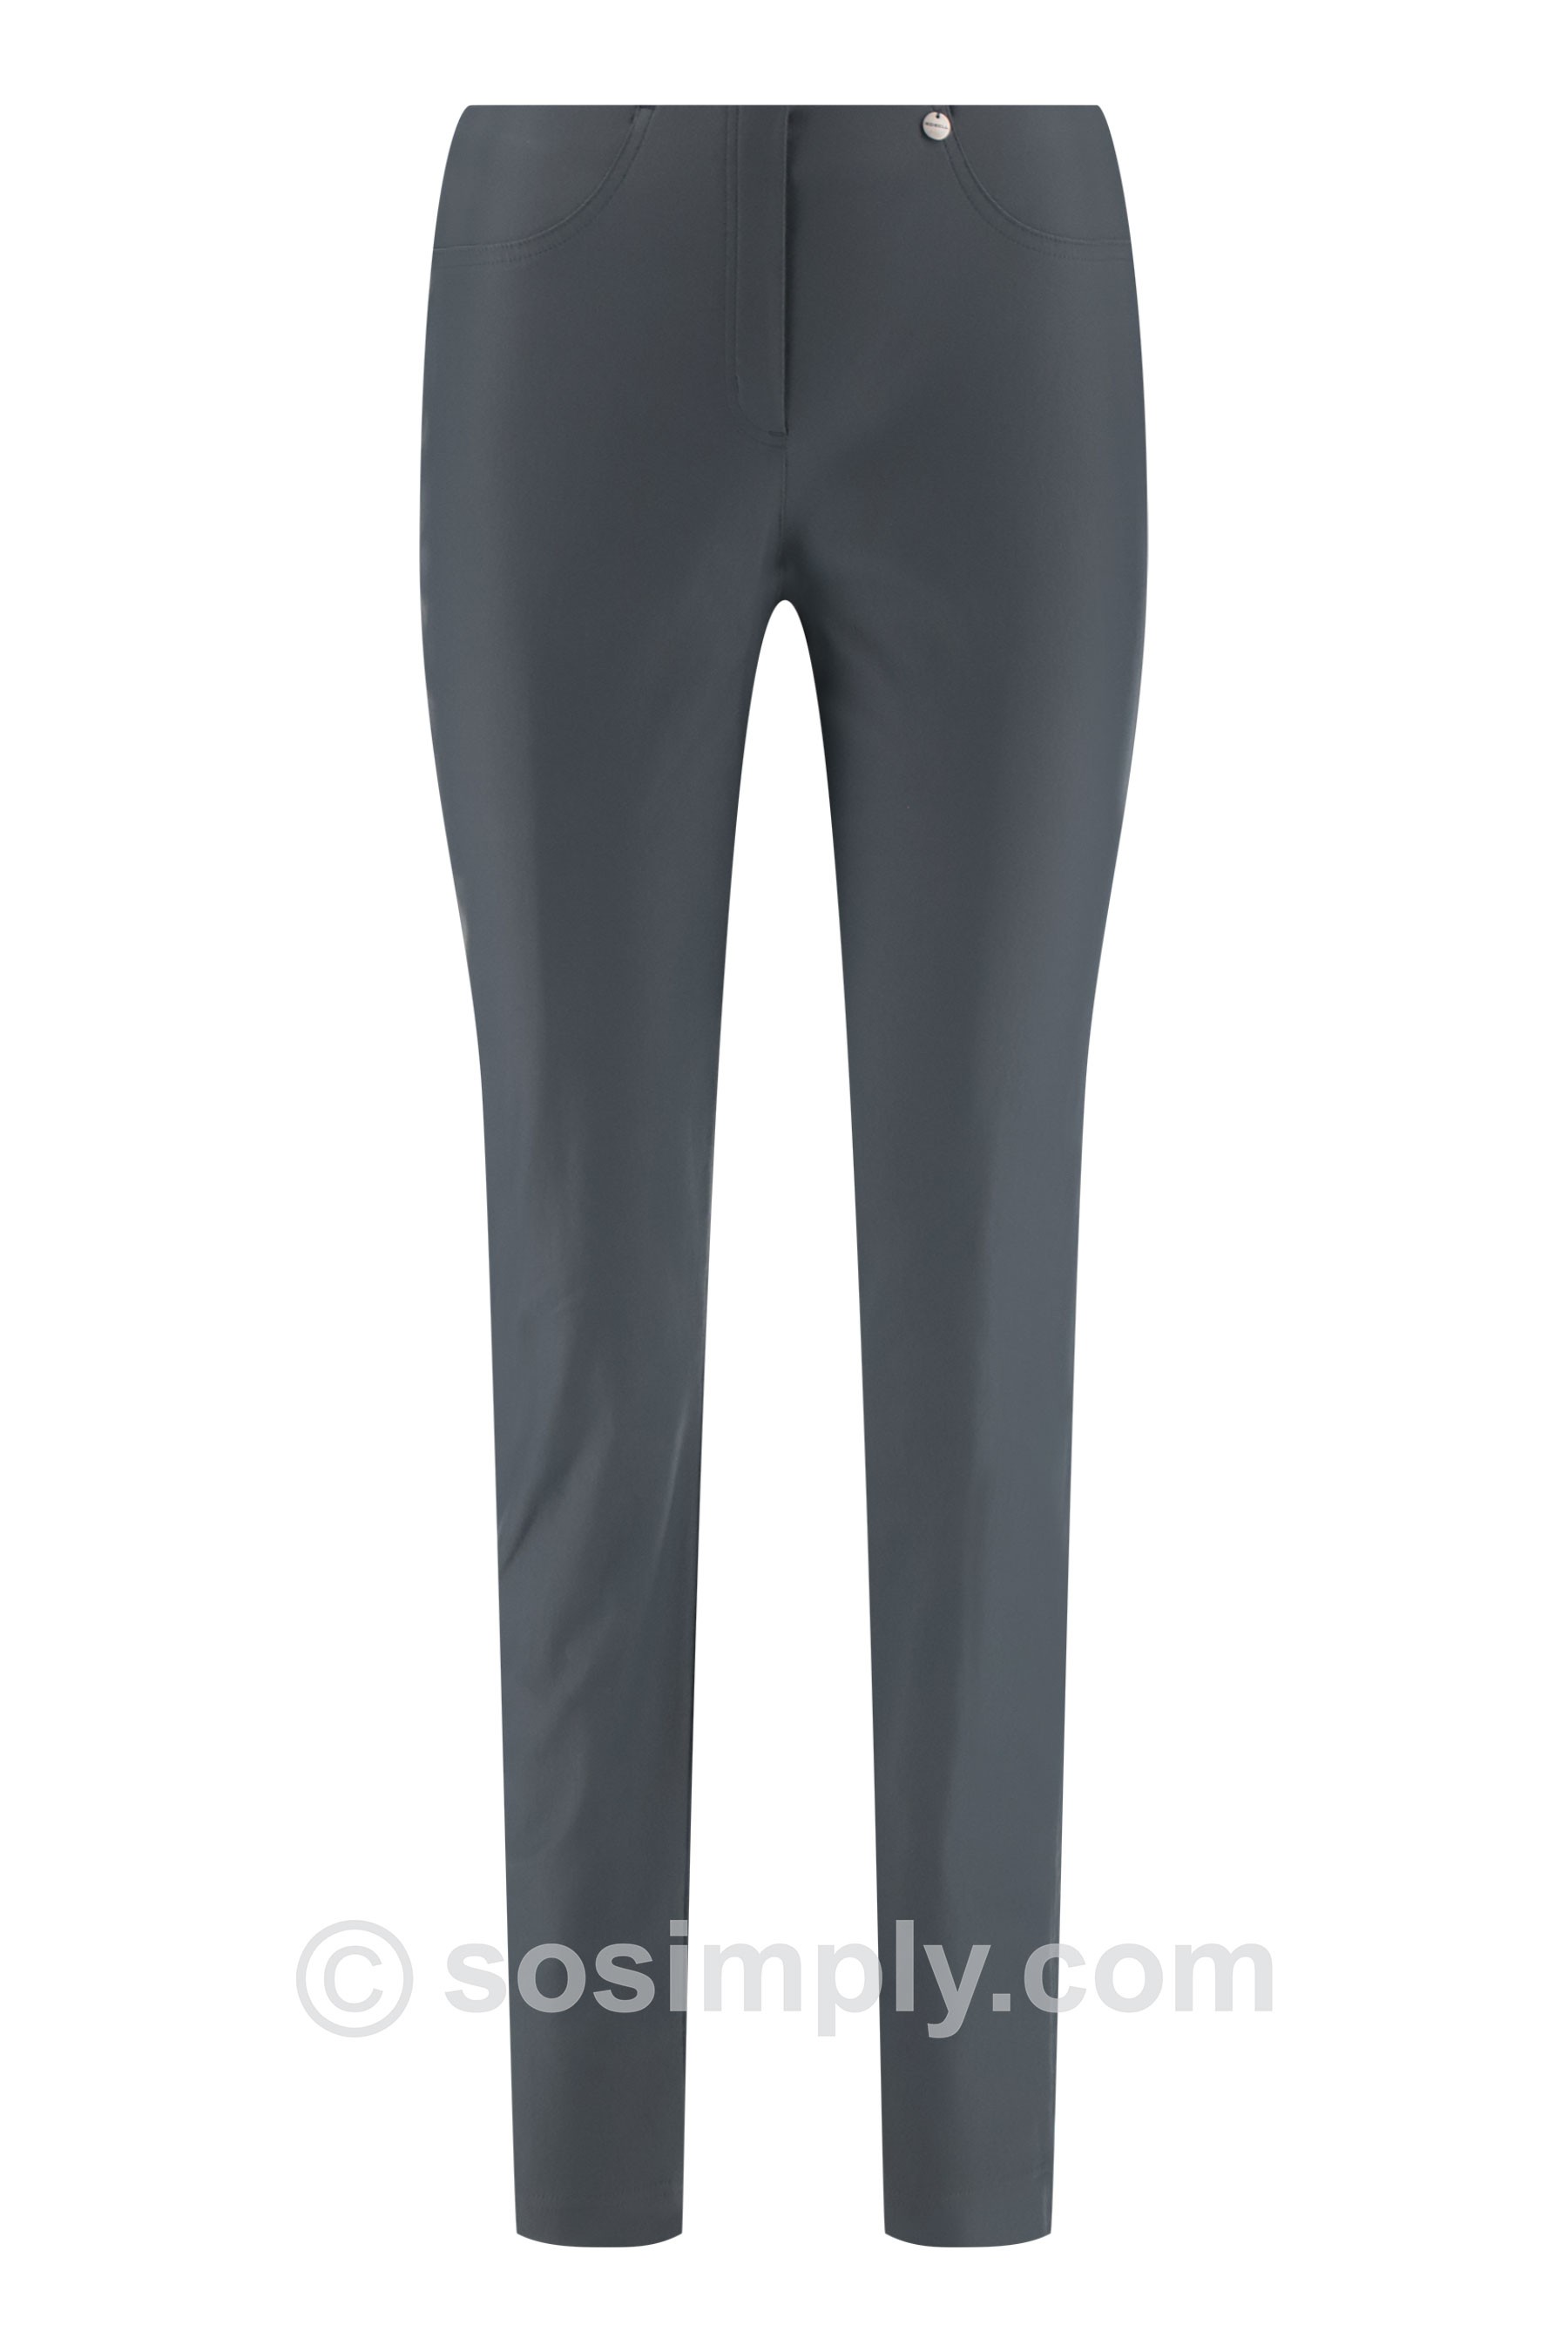 Robell Bella Black Faux Leather Trouser - So Simply Robell